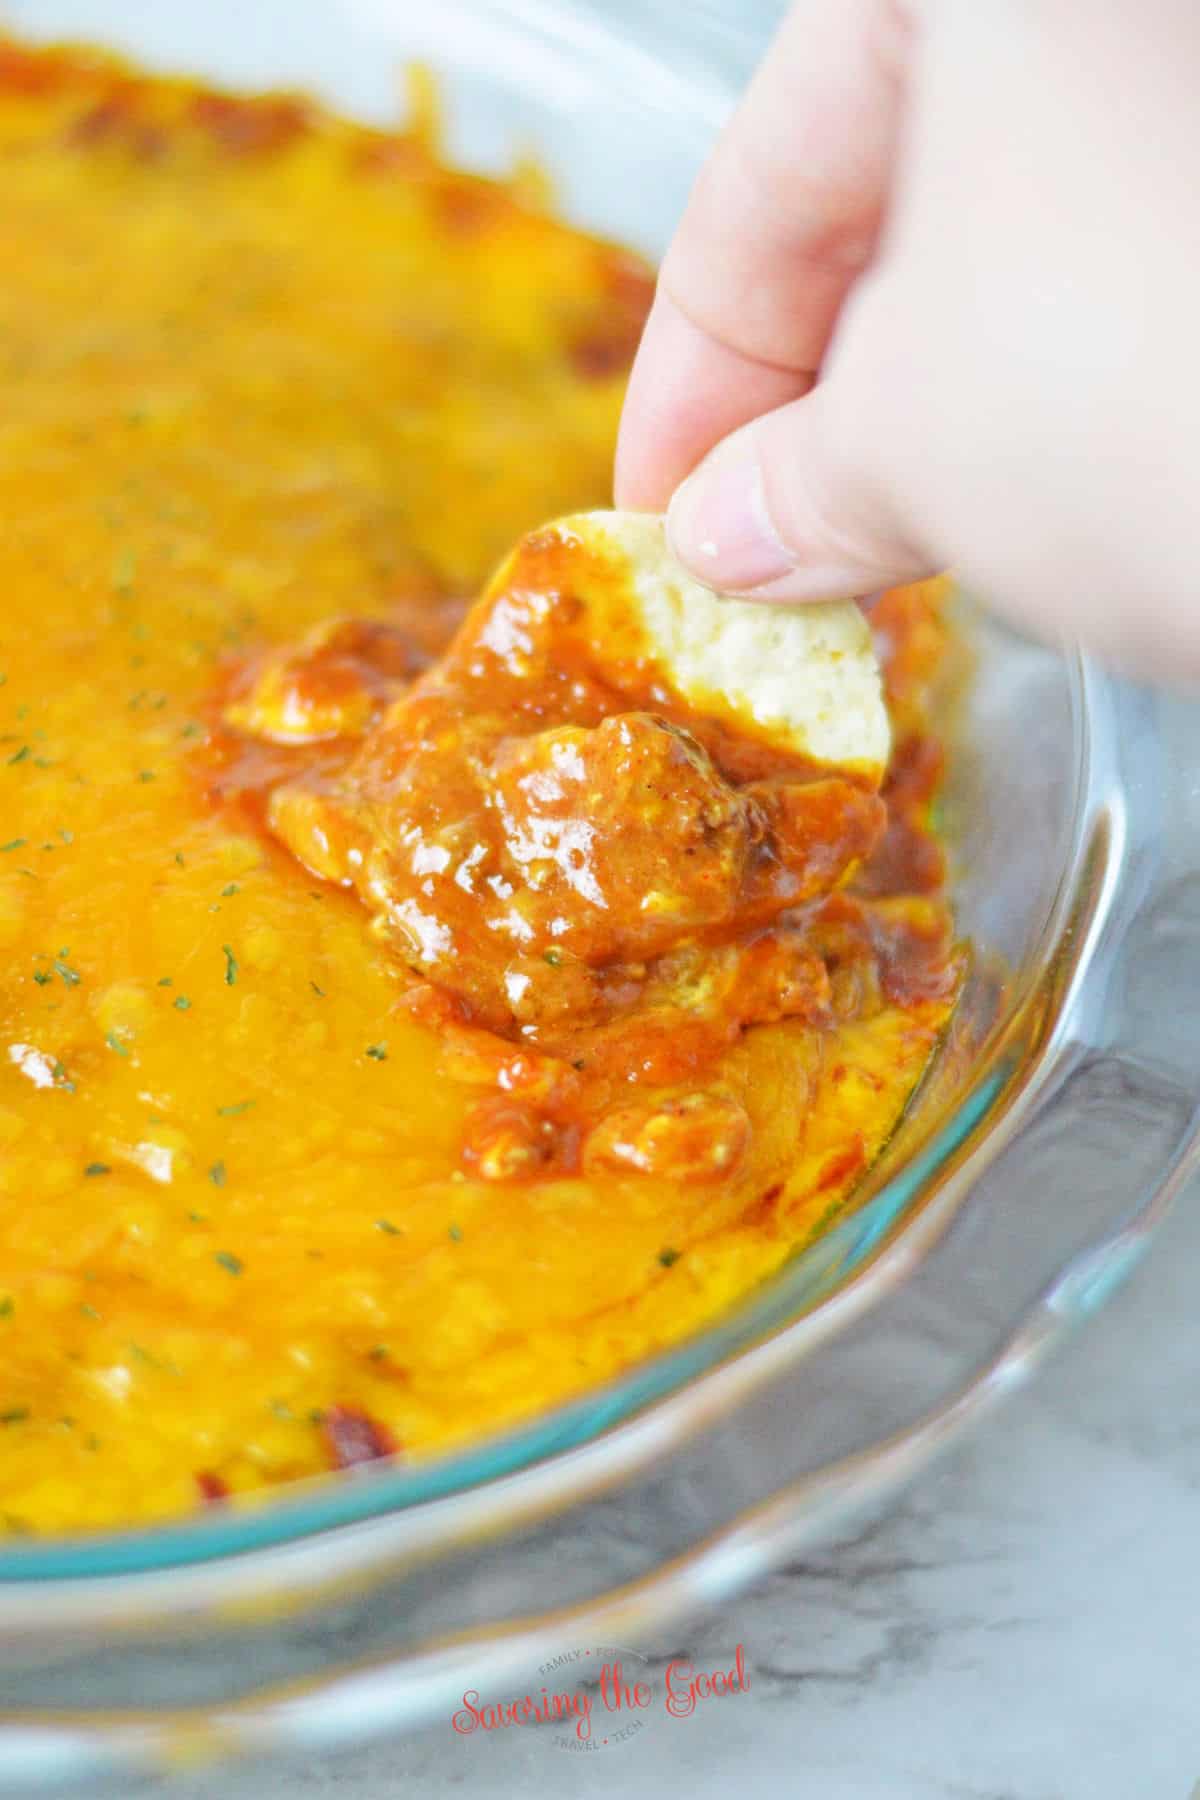 hand scooping a portion of chili cheese dip out of a glass pan.